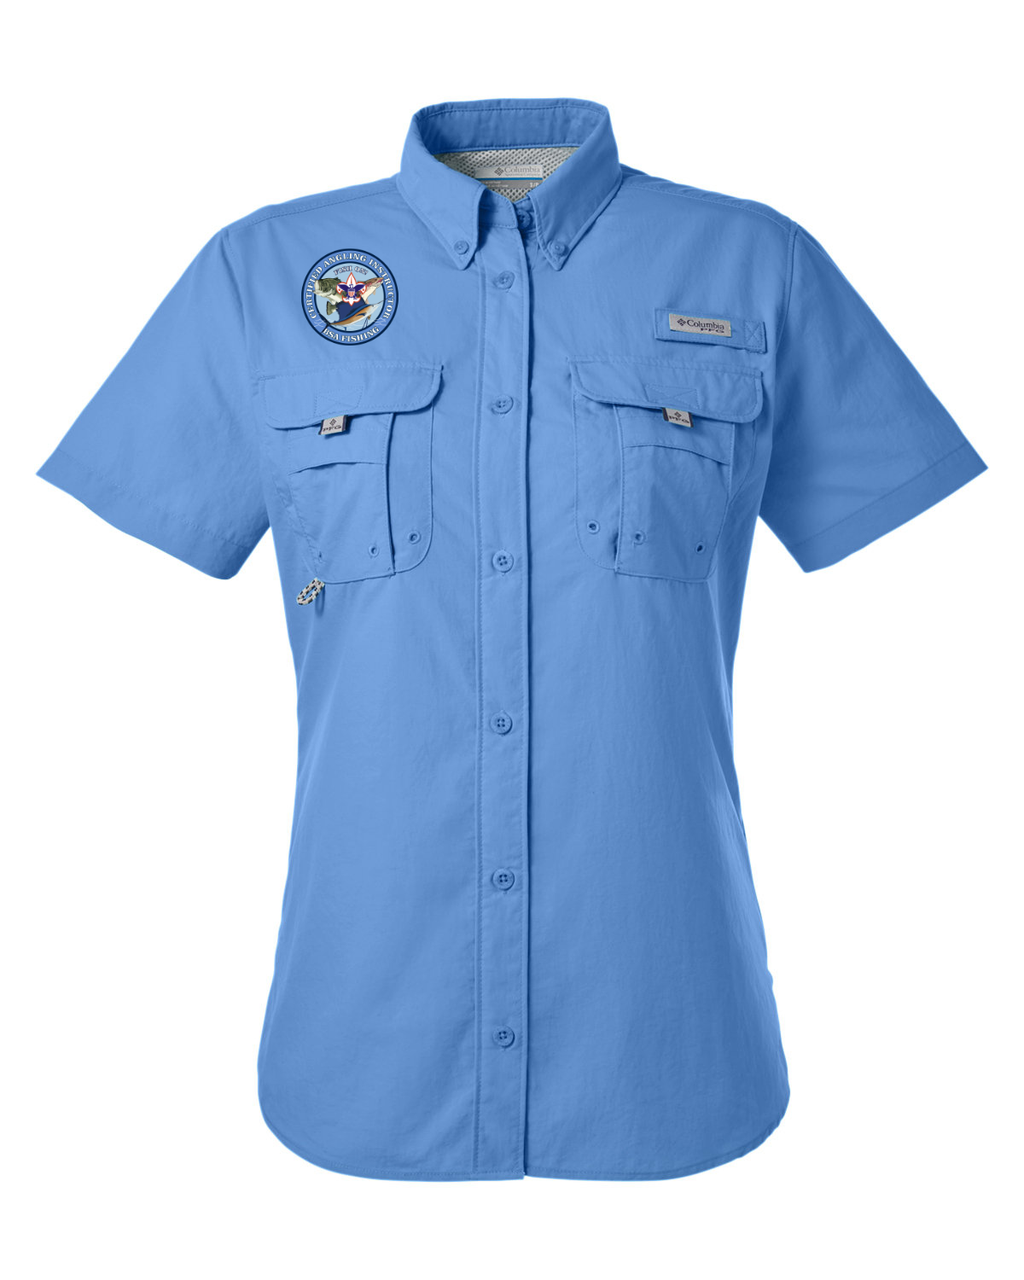 Ladies' Bahama Short-Sleeve Shirt- BSA Certified Angling Instructor by ClassB